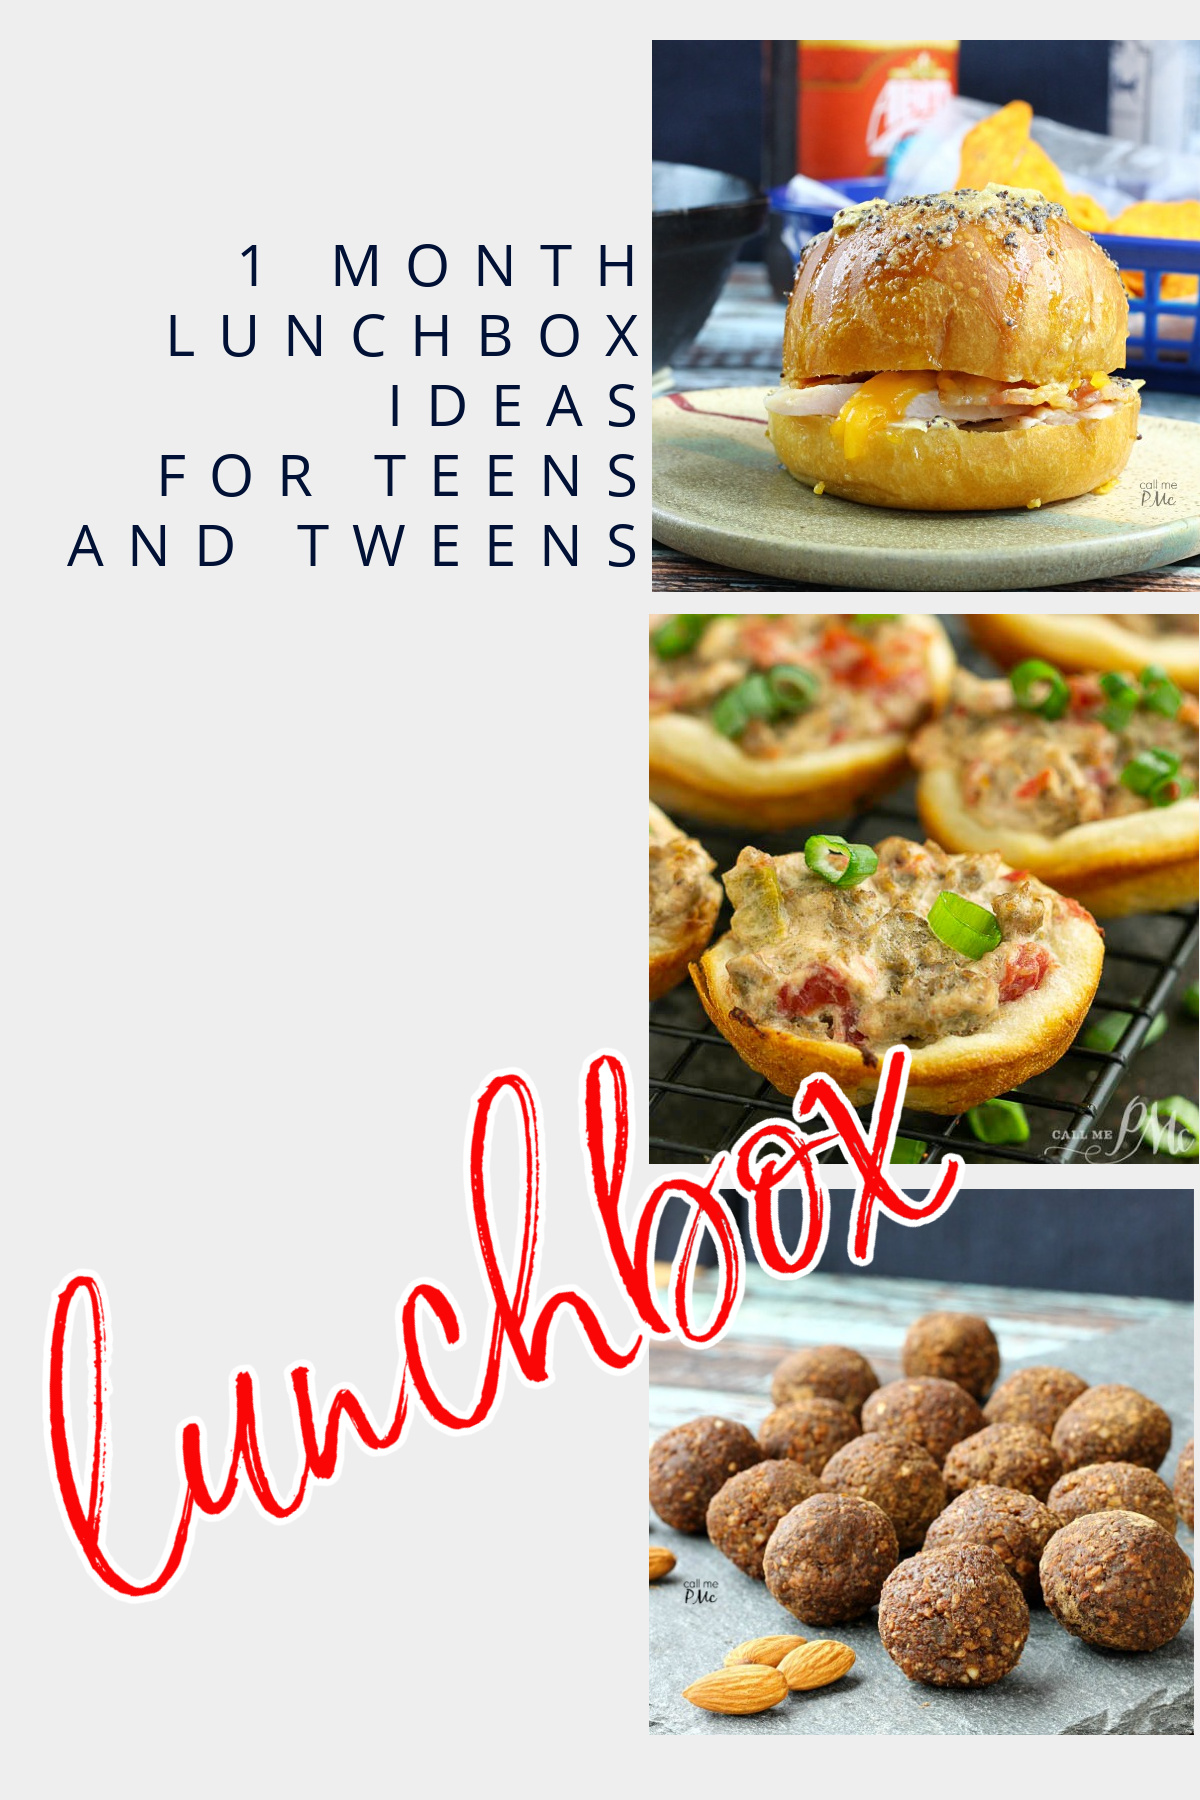 1 Month of Lunchbox Ideas for Tweens and Teens - a great resource collection of recipes for lunch ideas for teenagers right at your fingertips!